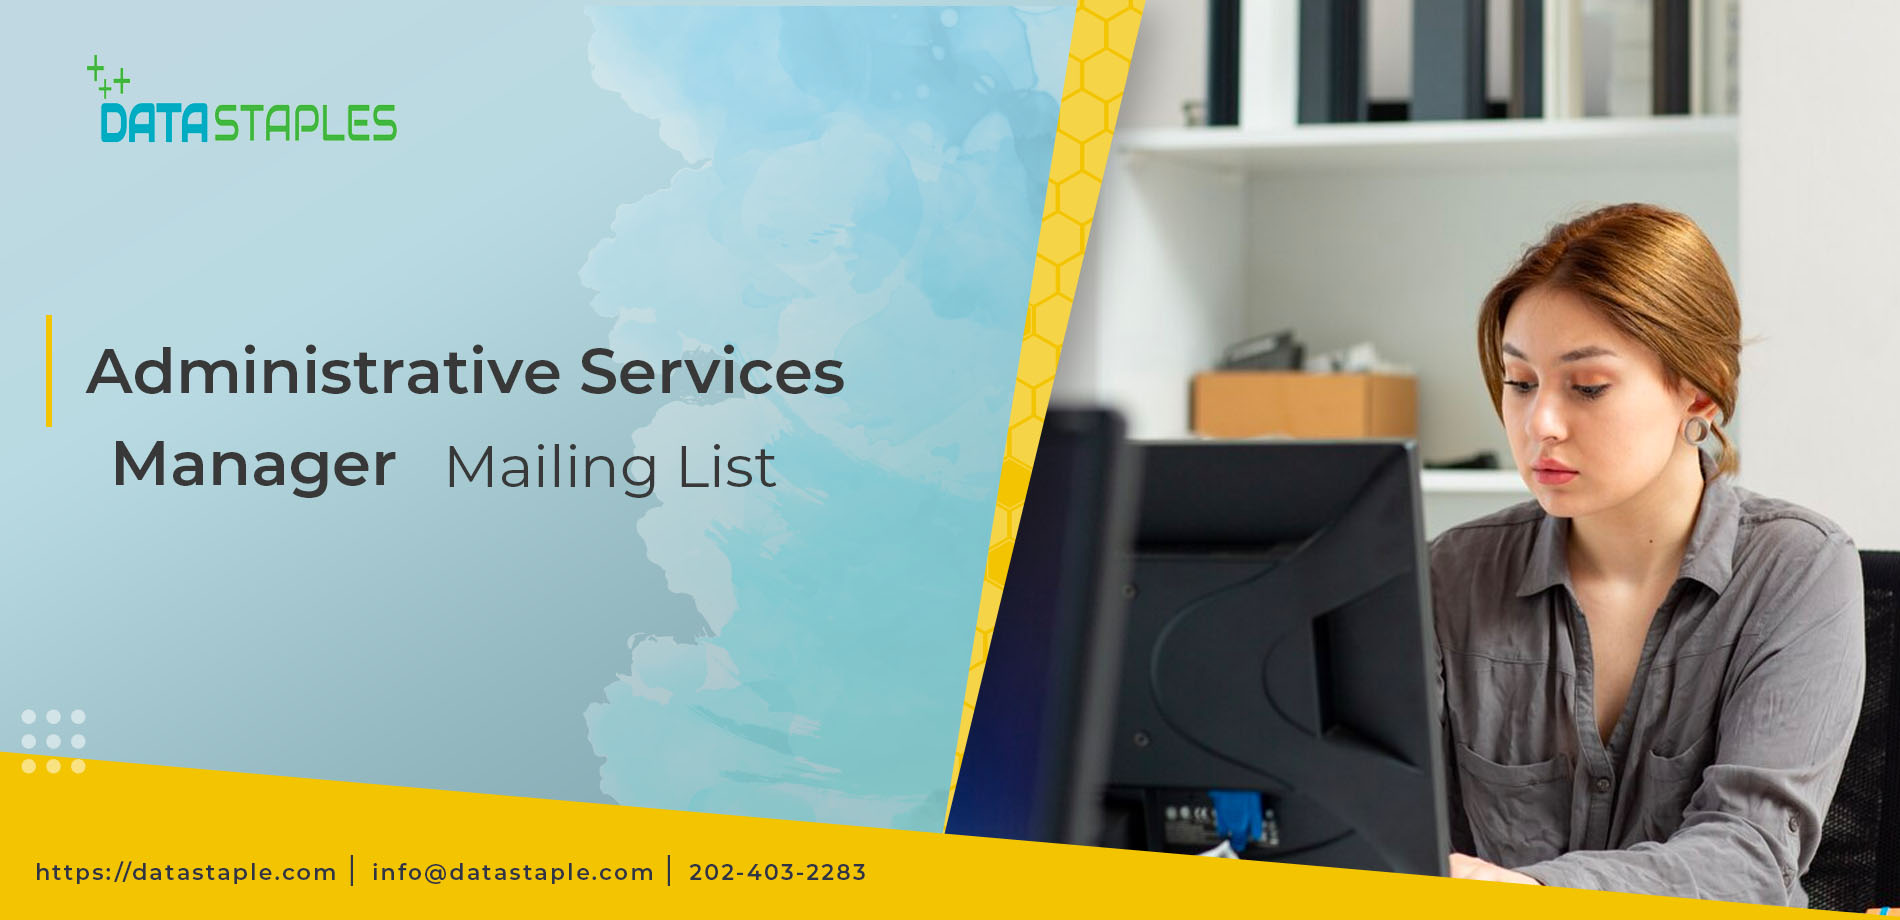 Administrative Services Manager Mailing List | DataStaples